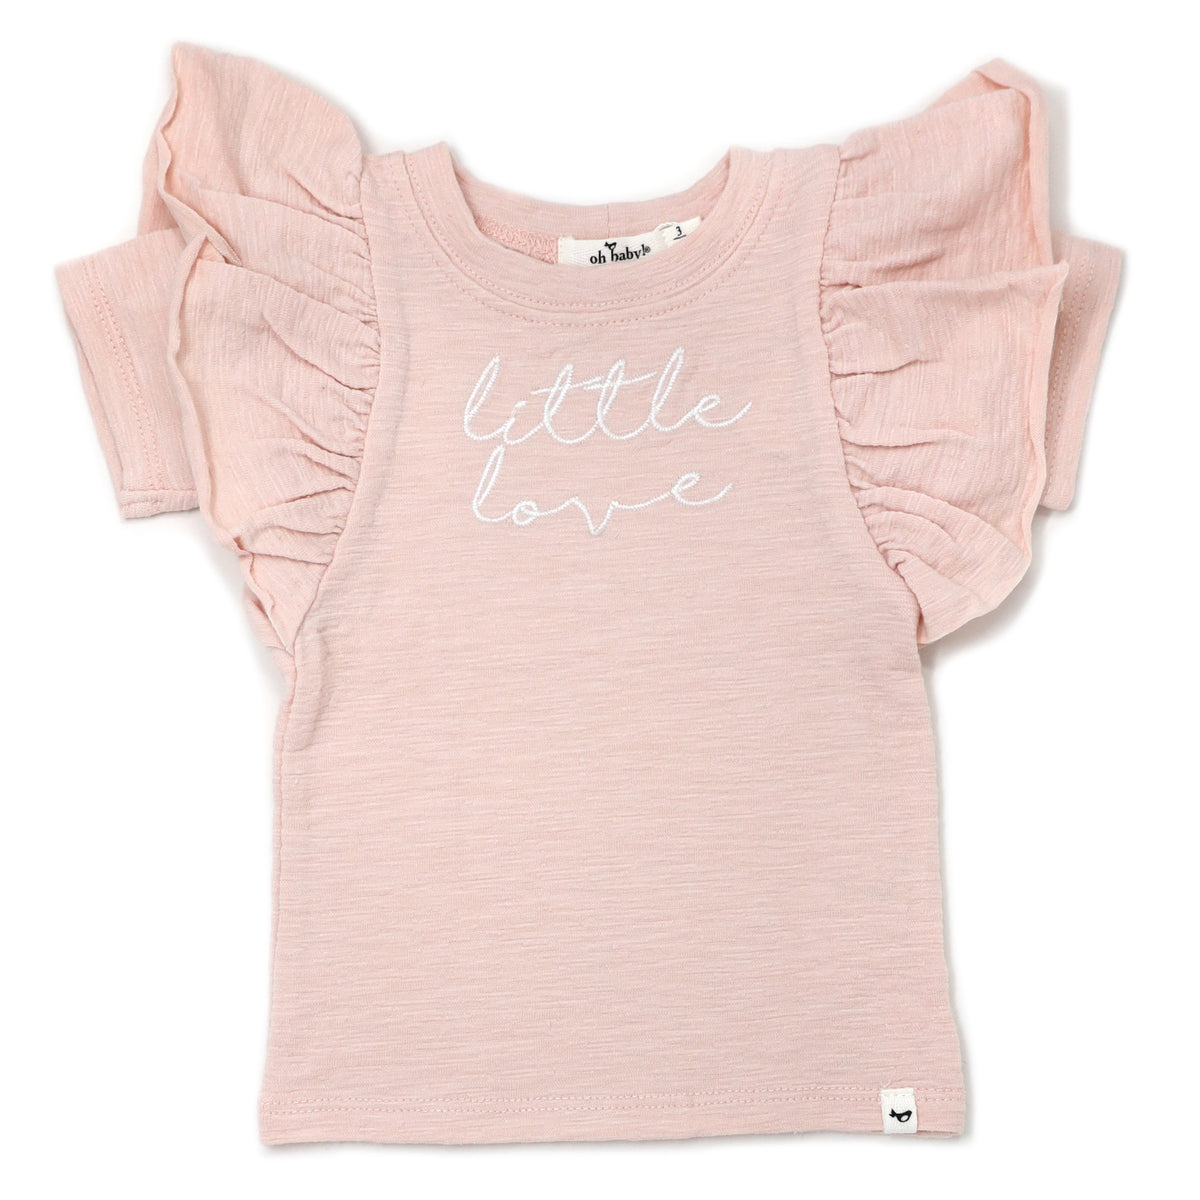 oh baby! Butterfly Short Sleeve Slub Tee -  "little loves" Embroidery - Pale Pink